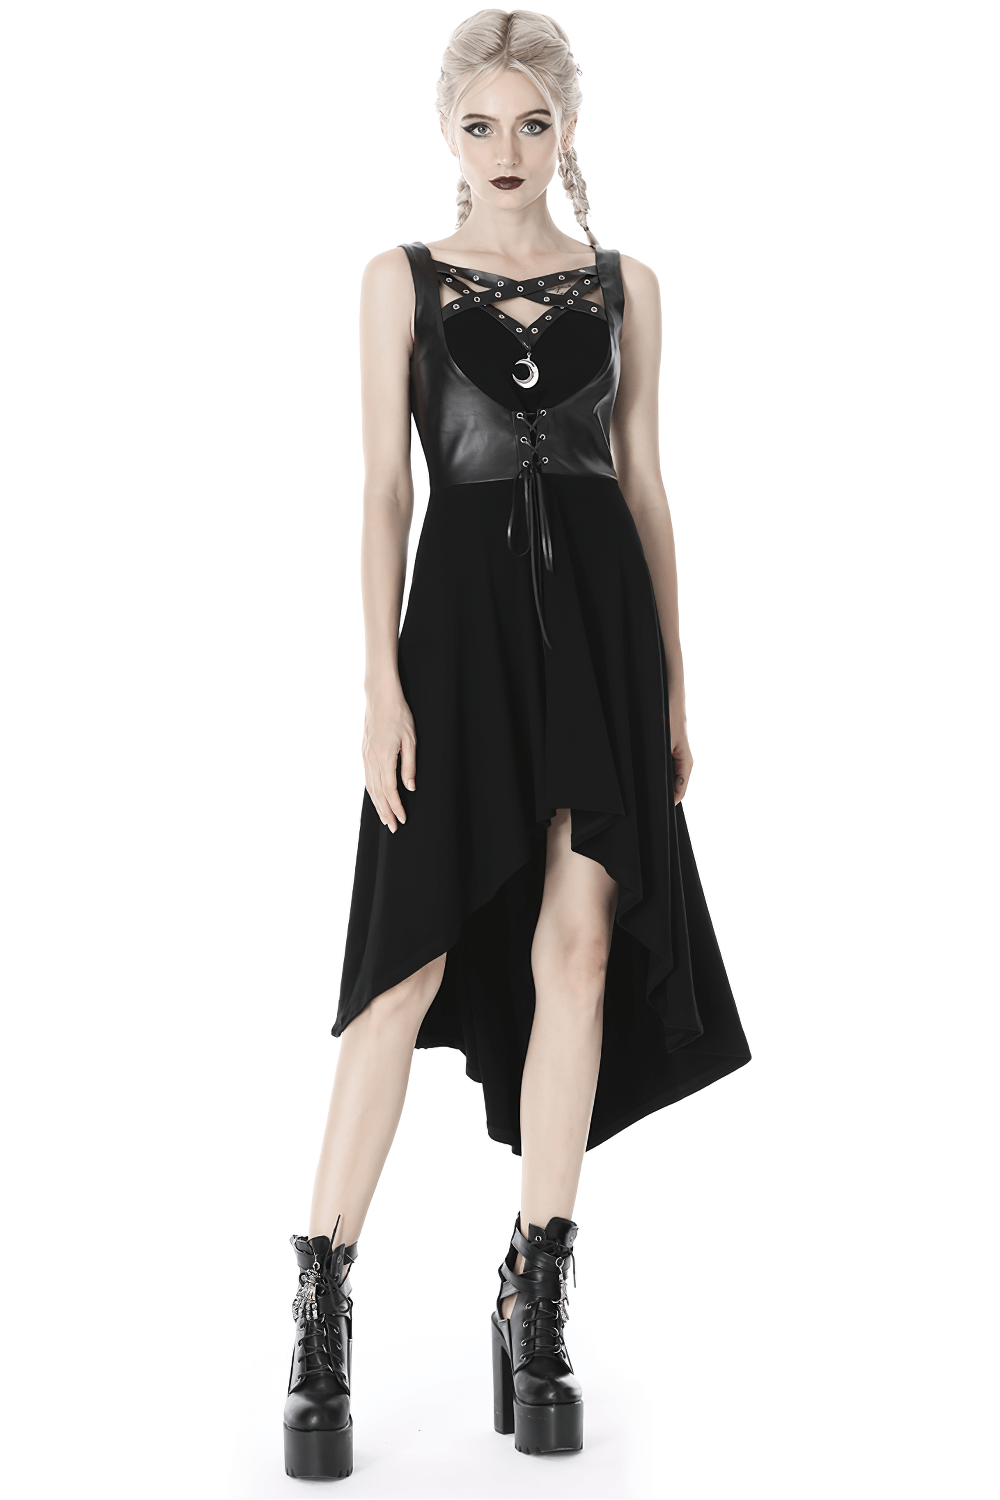 Gothic High-Low Dress with Lace-Up Corset and Moon Pendant